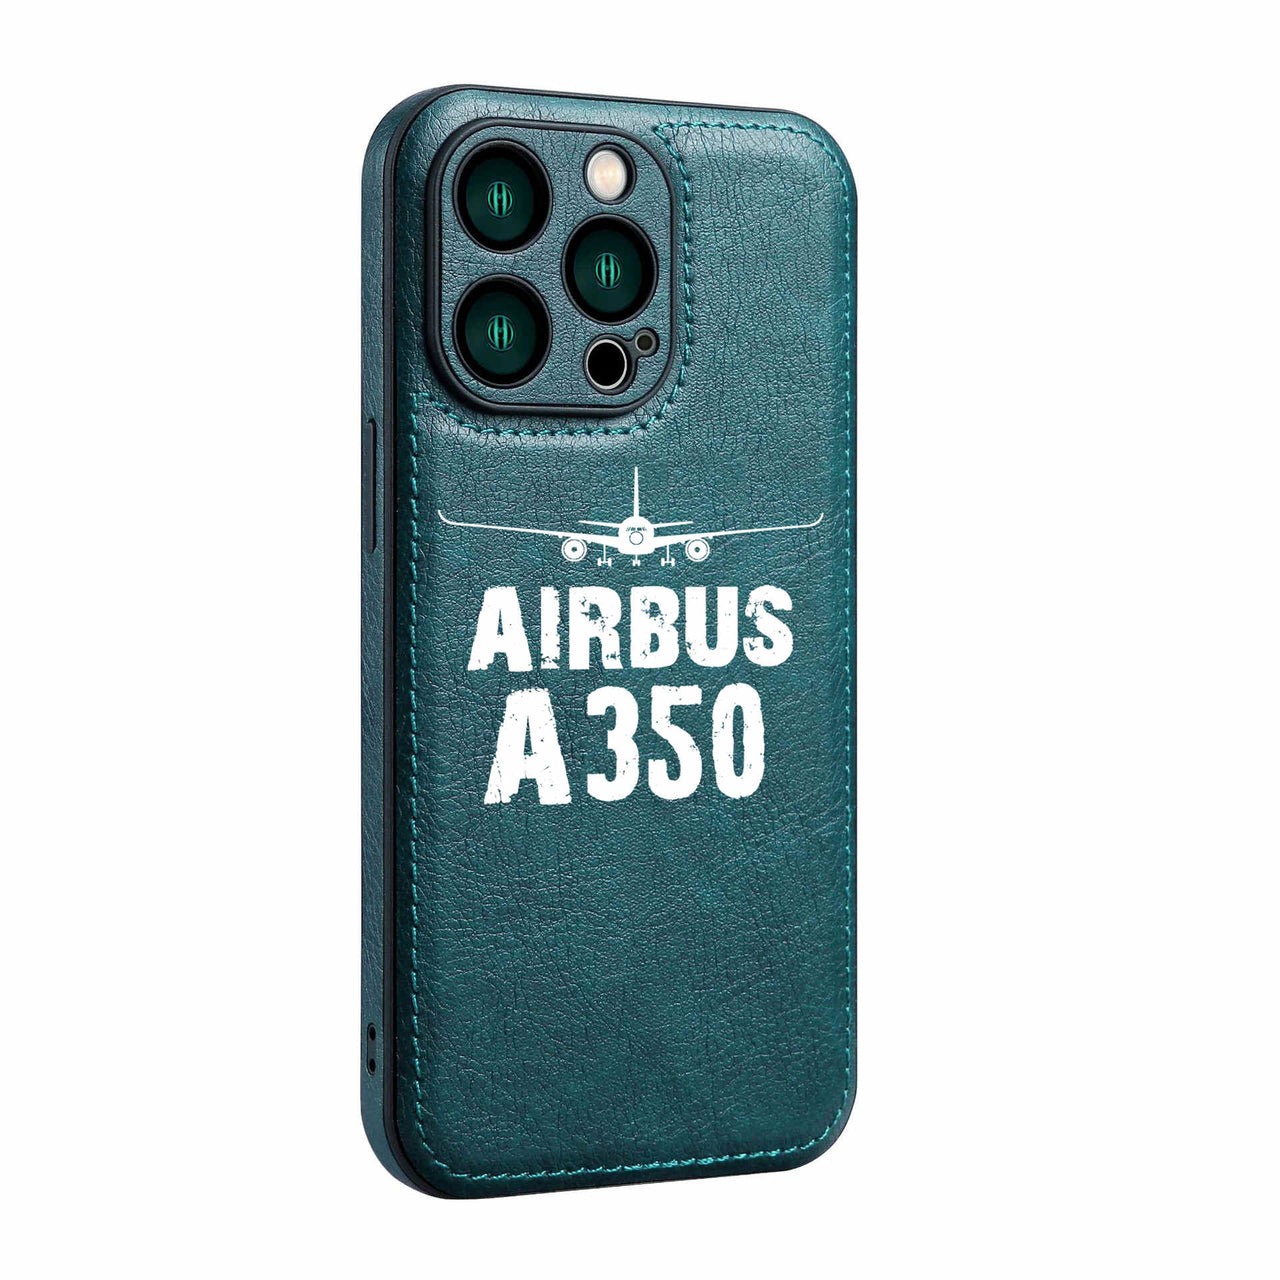 Airbus A350 & Plane Designed Leather iPhone Cases